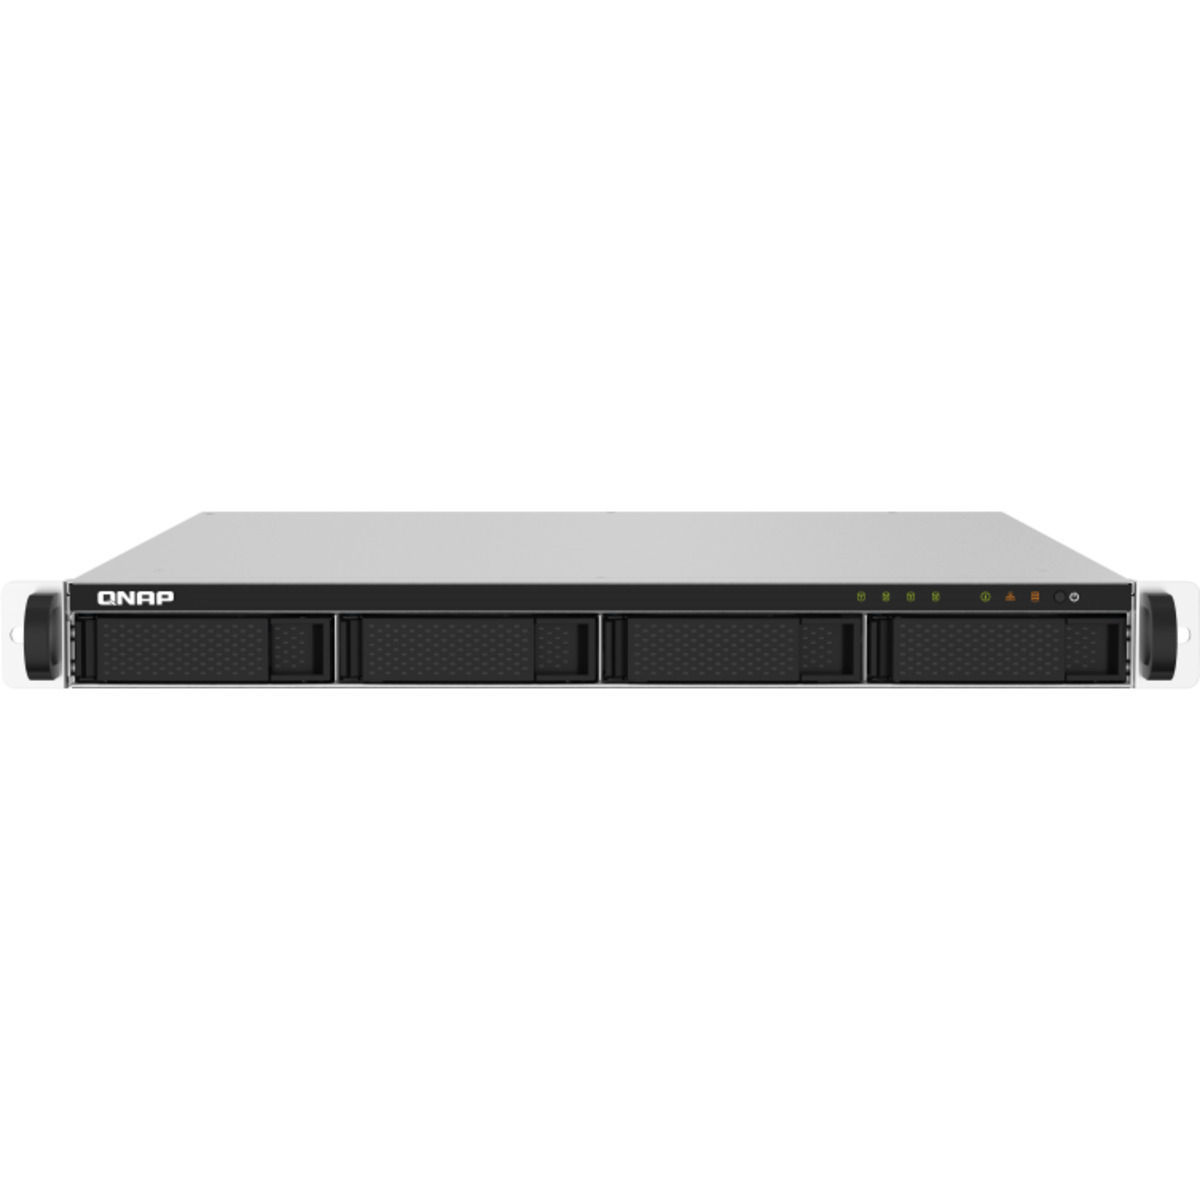 buy $2099 QNAP TS-432PXU-RP 24tb RackMount NAS - Network Attached Storage Device 4x6000gb Seagate IronWolf Pro ST6000NT001 3.5 7200rpm SATA 6Gb/s HDD NAS Class Drives Installed - Burn-In Tested - FREE RAM UPGRADE - nas headquarters buy network attached storage server device das new raid-5 free shipping simply usa TS-432PXU-RP